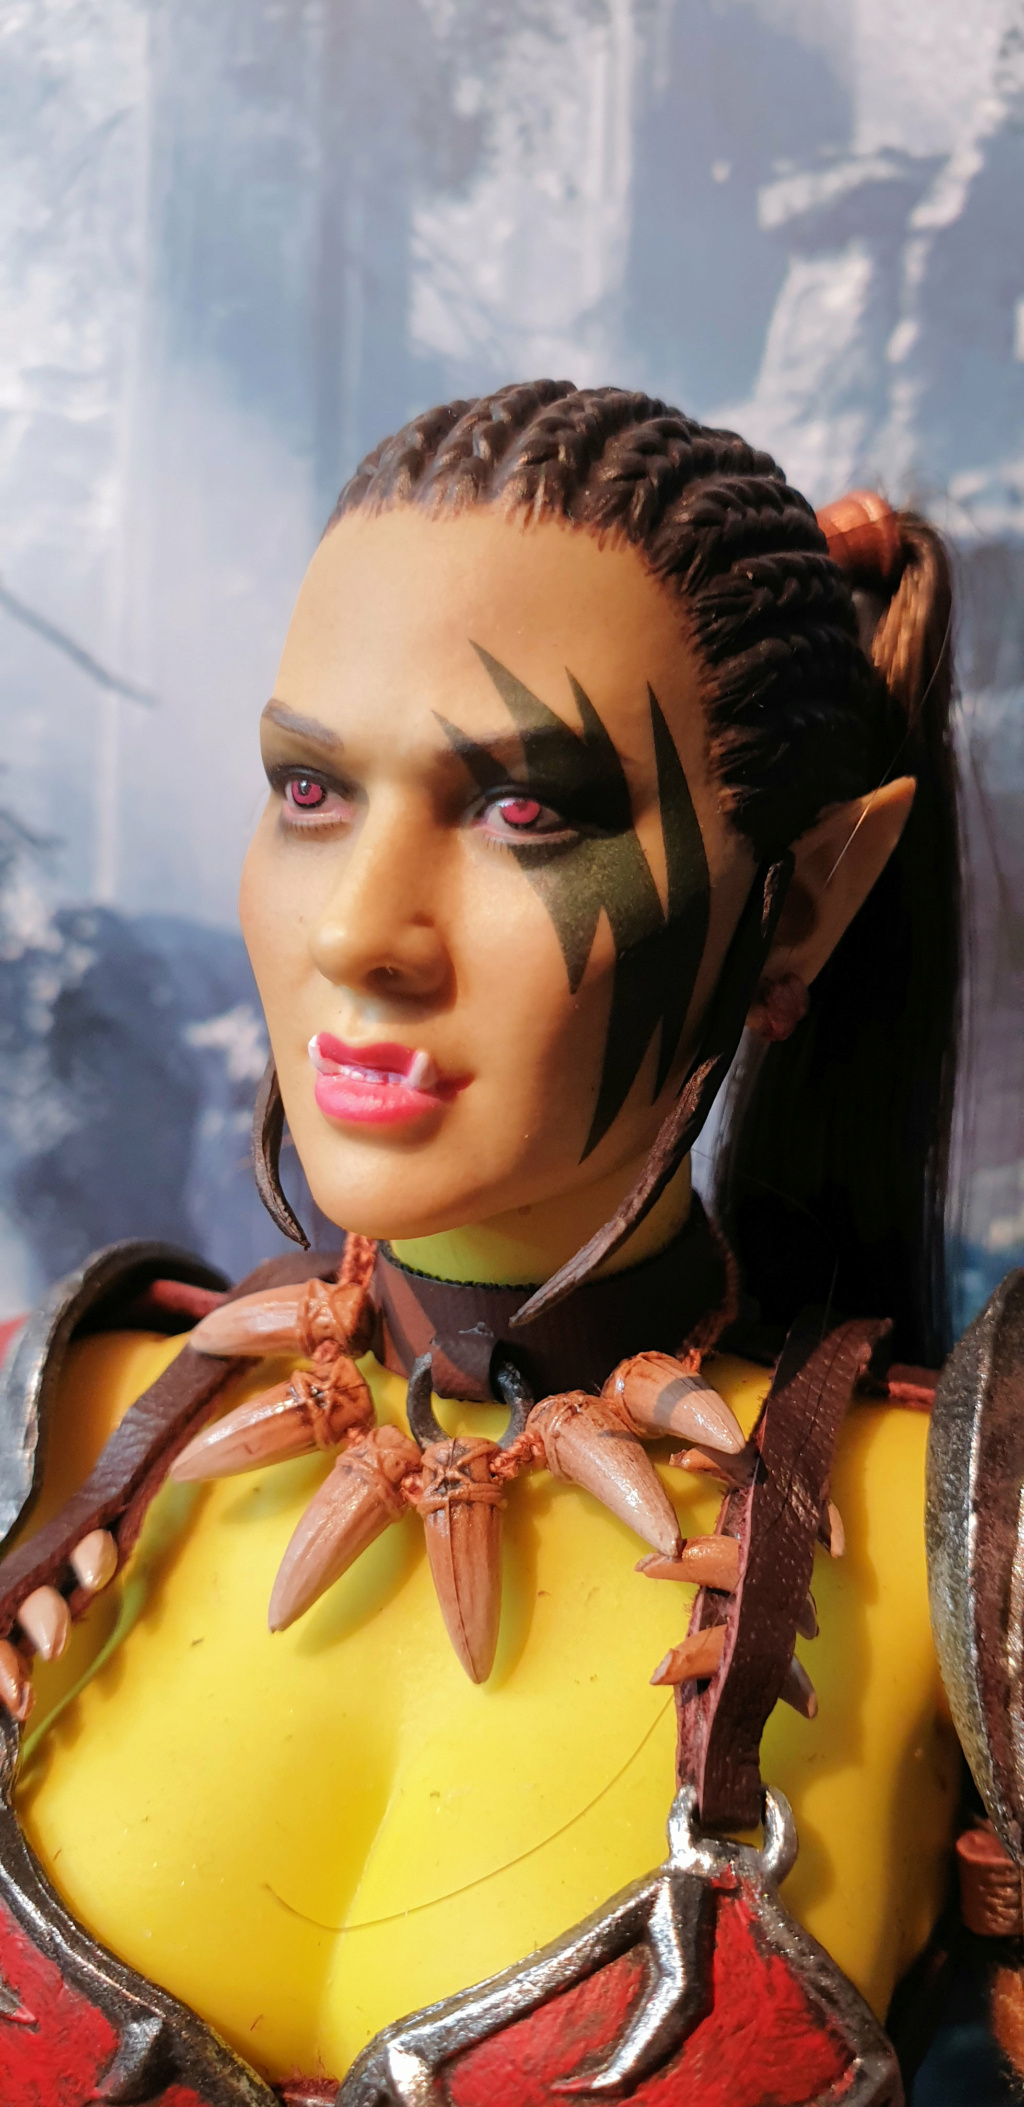 videogame-based - NEW PRODUCT: War Story: 1/6 Orc Female Assassin-For the Horde! (NO.WS008) 20210311